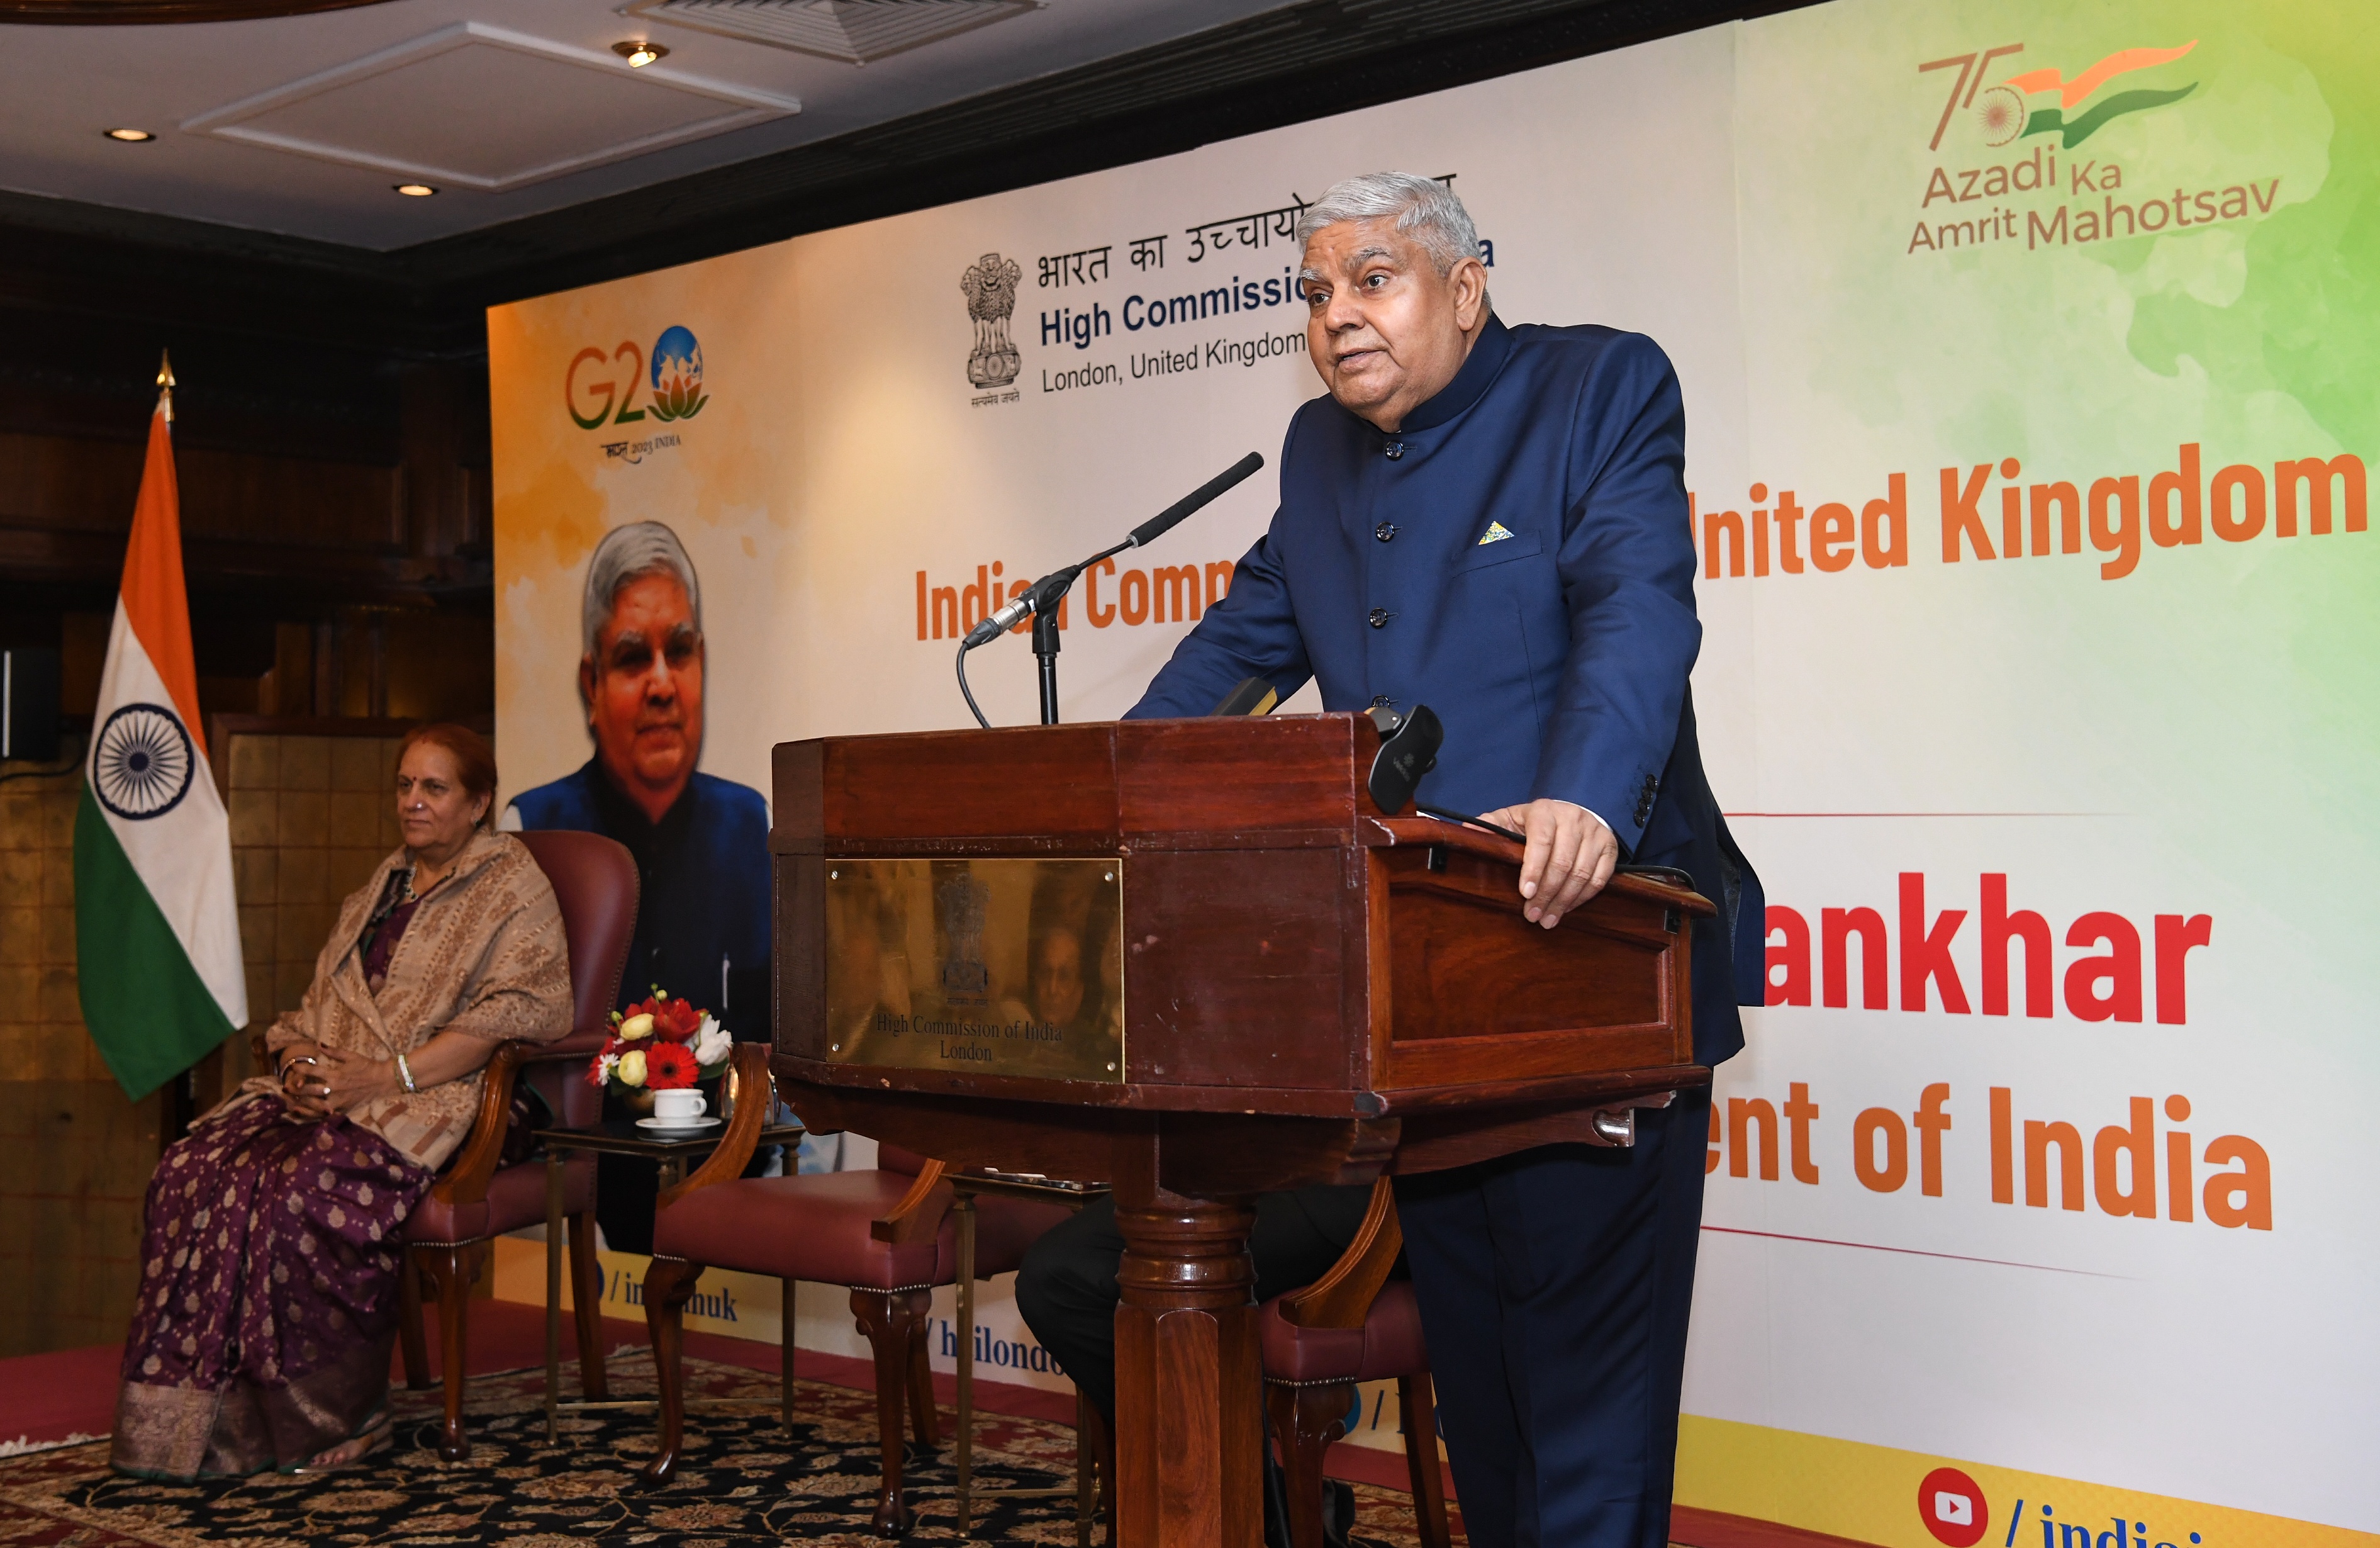 The Vice President, Shri Jagdeep Dhankhar addressing the members of the Indian community in the United Kingdom on May 05, 2023.